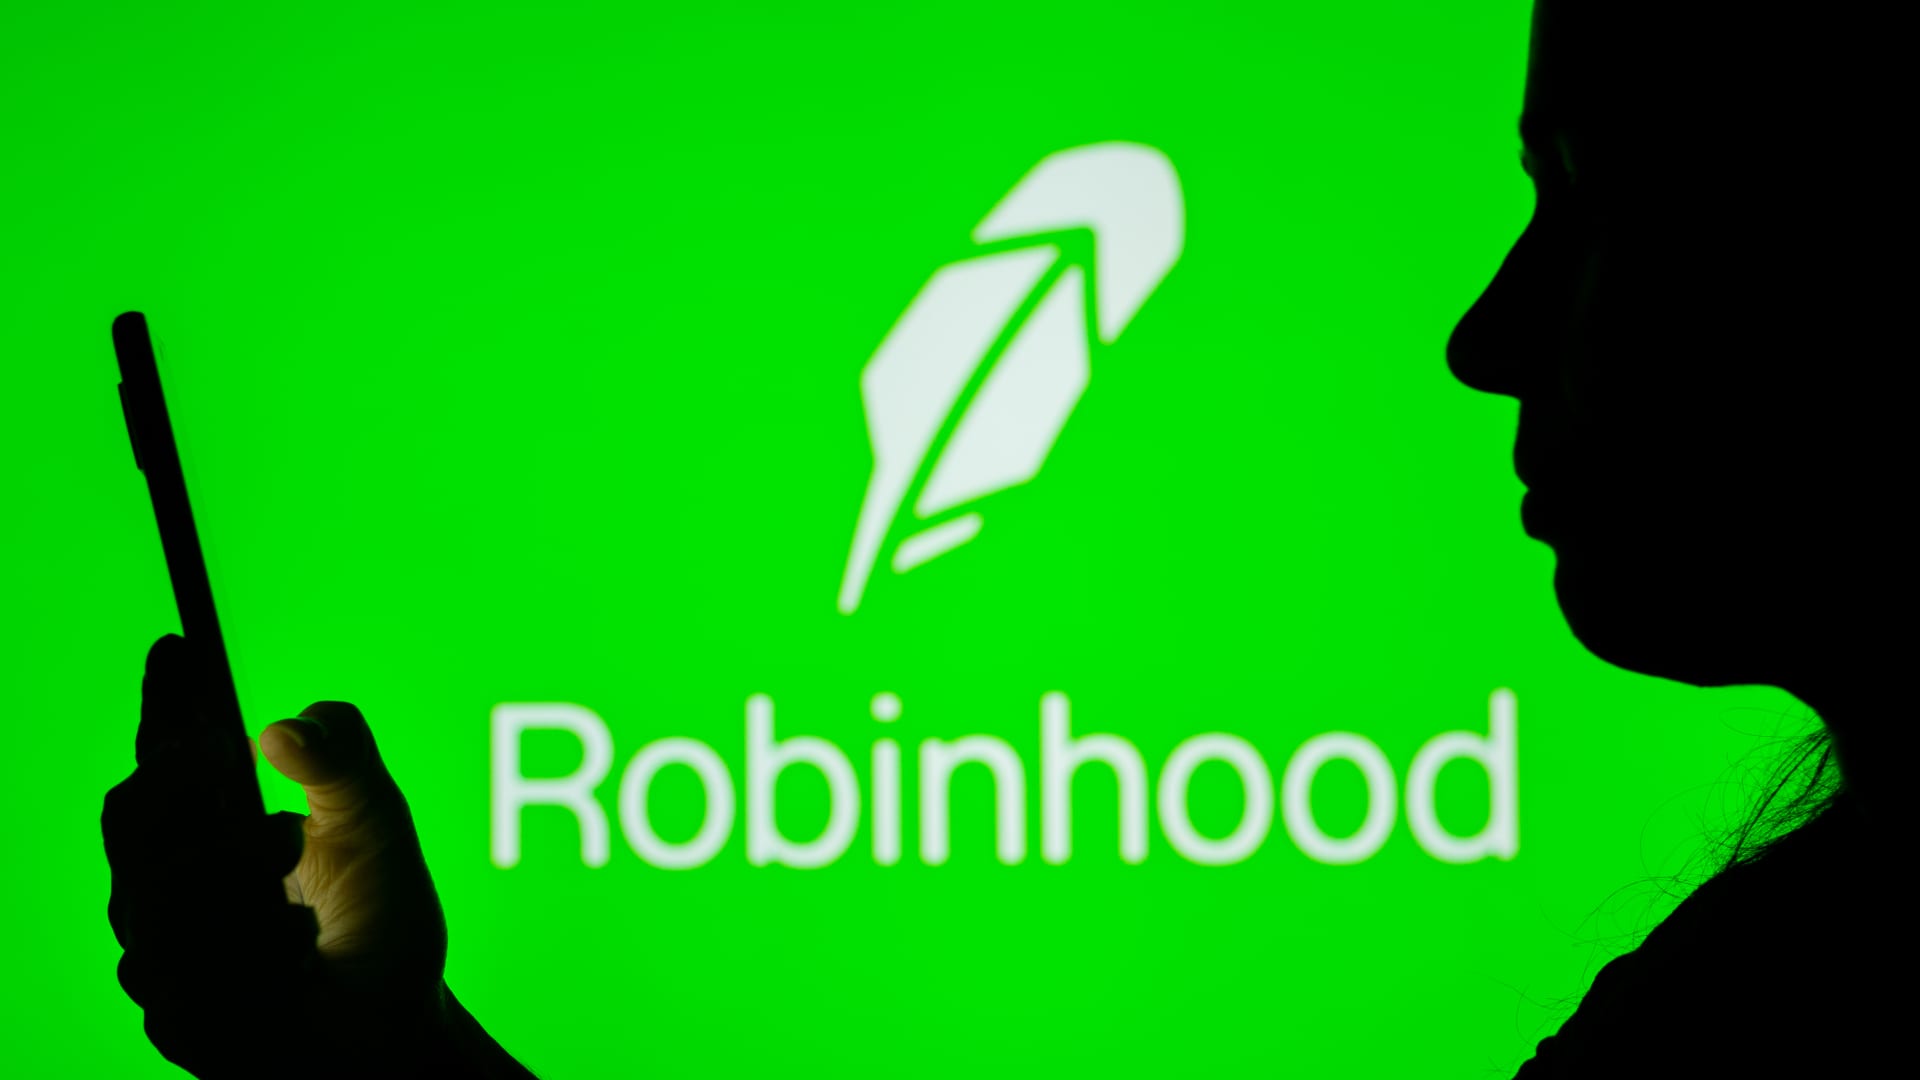 Robinhood to pay a 1% 'match' on customer contributions to retail individual retirement accounts